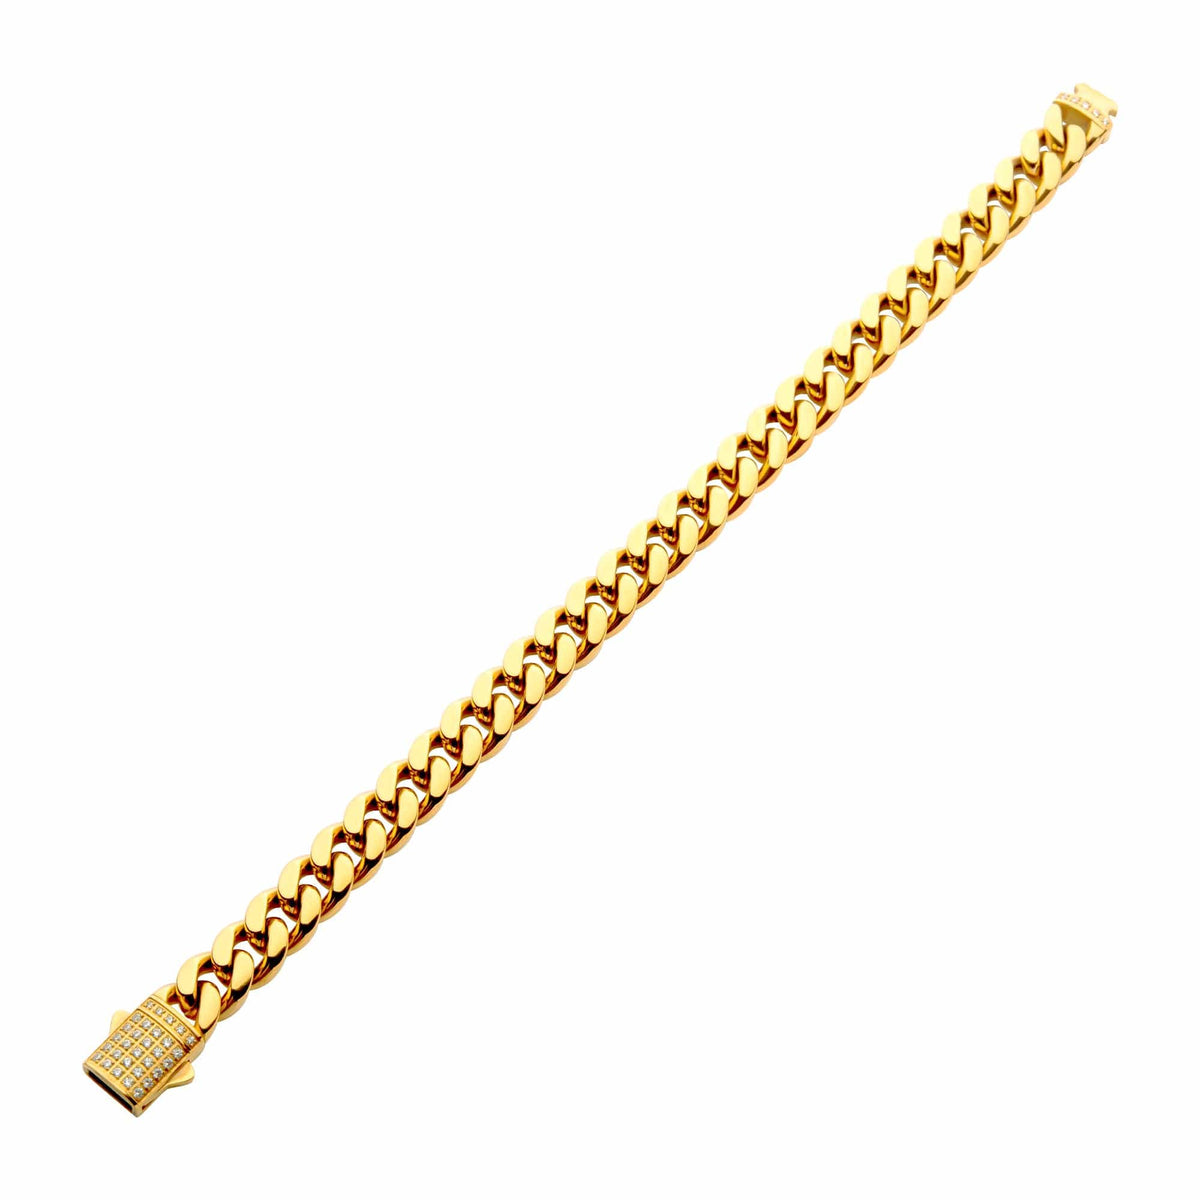 INOX JEWELRY Bracelets Lab Grown Diamond 18K Gold Ion Plated Stainless Steel 10mm Miami Cuban Chain Bracelet with Double Tab Box Clasp